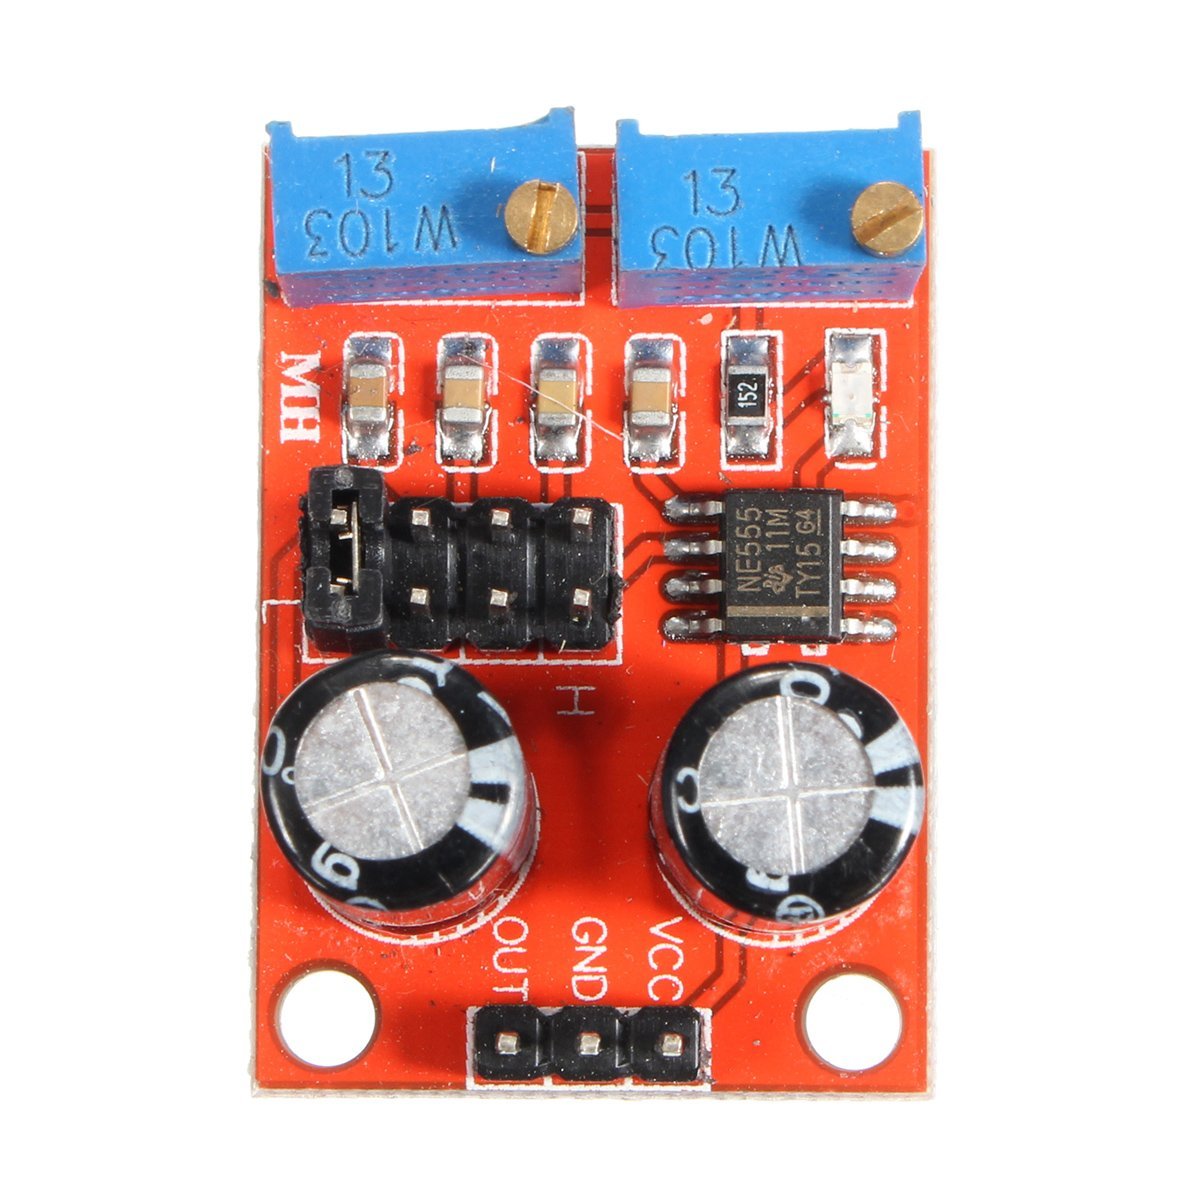 NE555 Pulse Module Frequency Duty Cycle Adjustable Square Signal Generator LL 